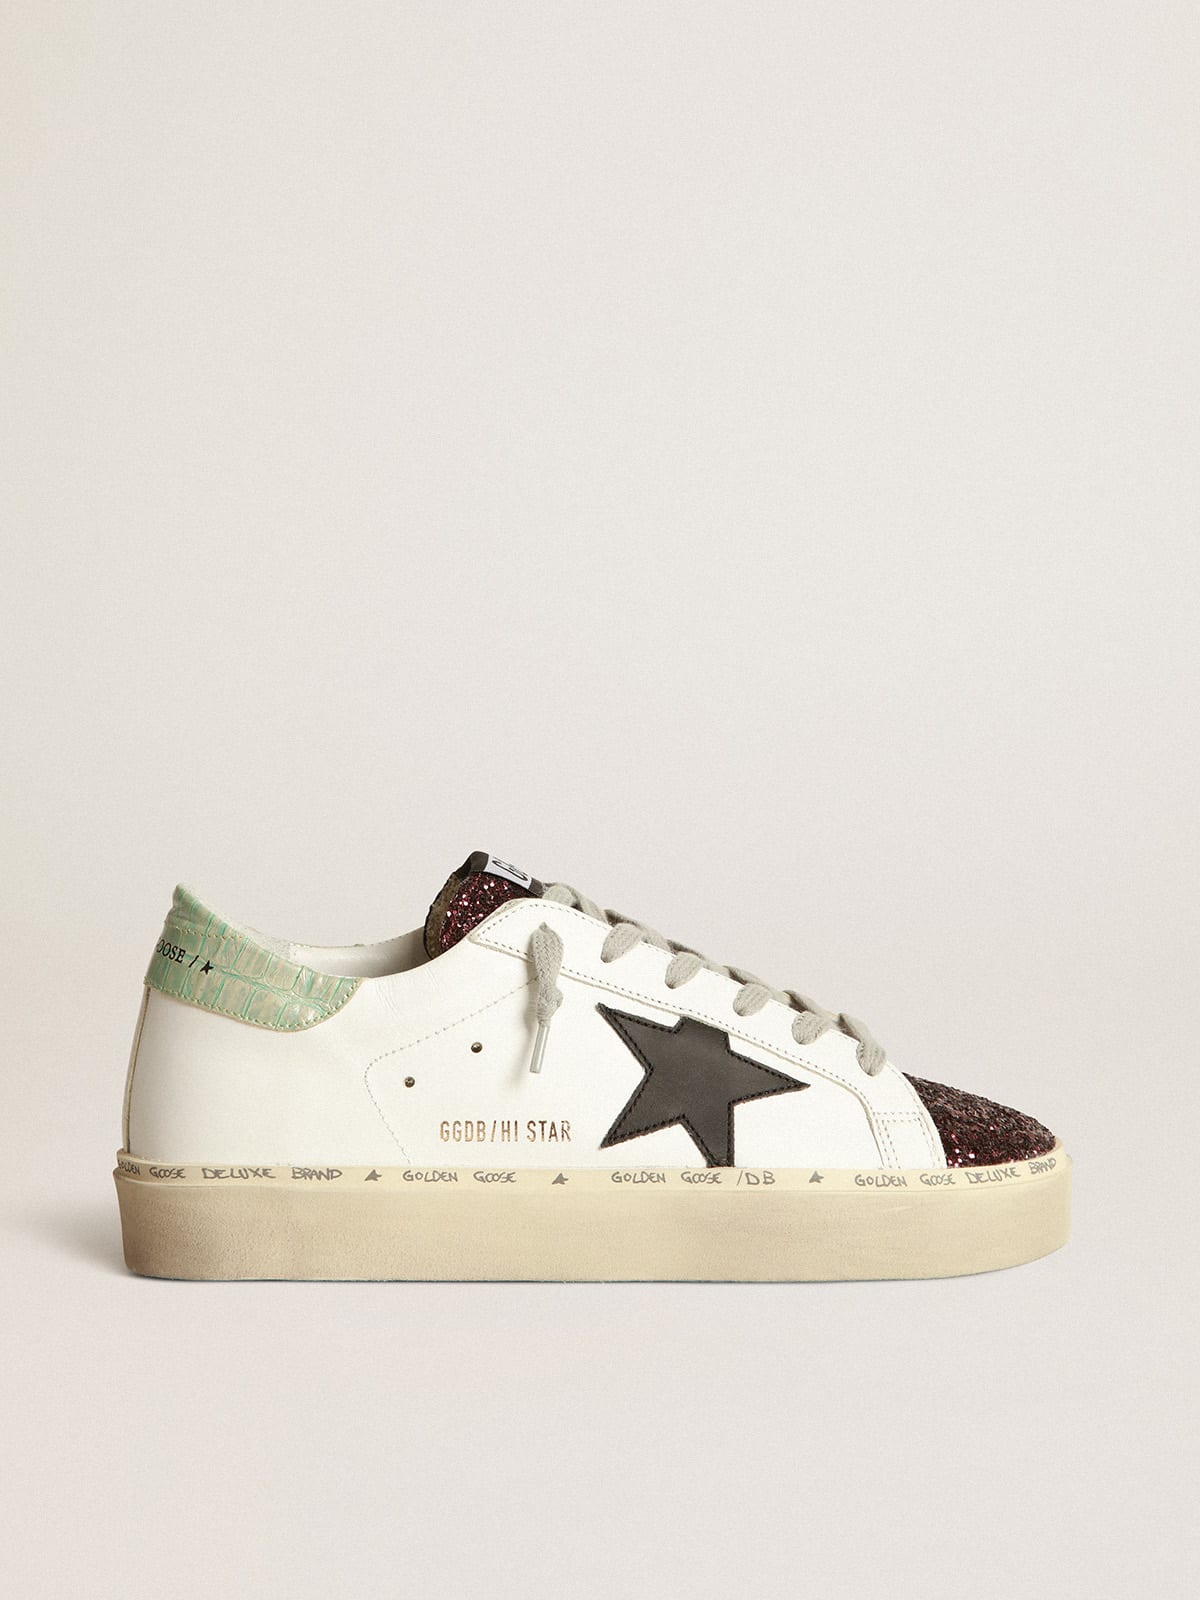 White Hi-Star sneakers with glittery insert and black star